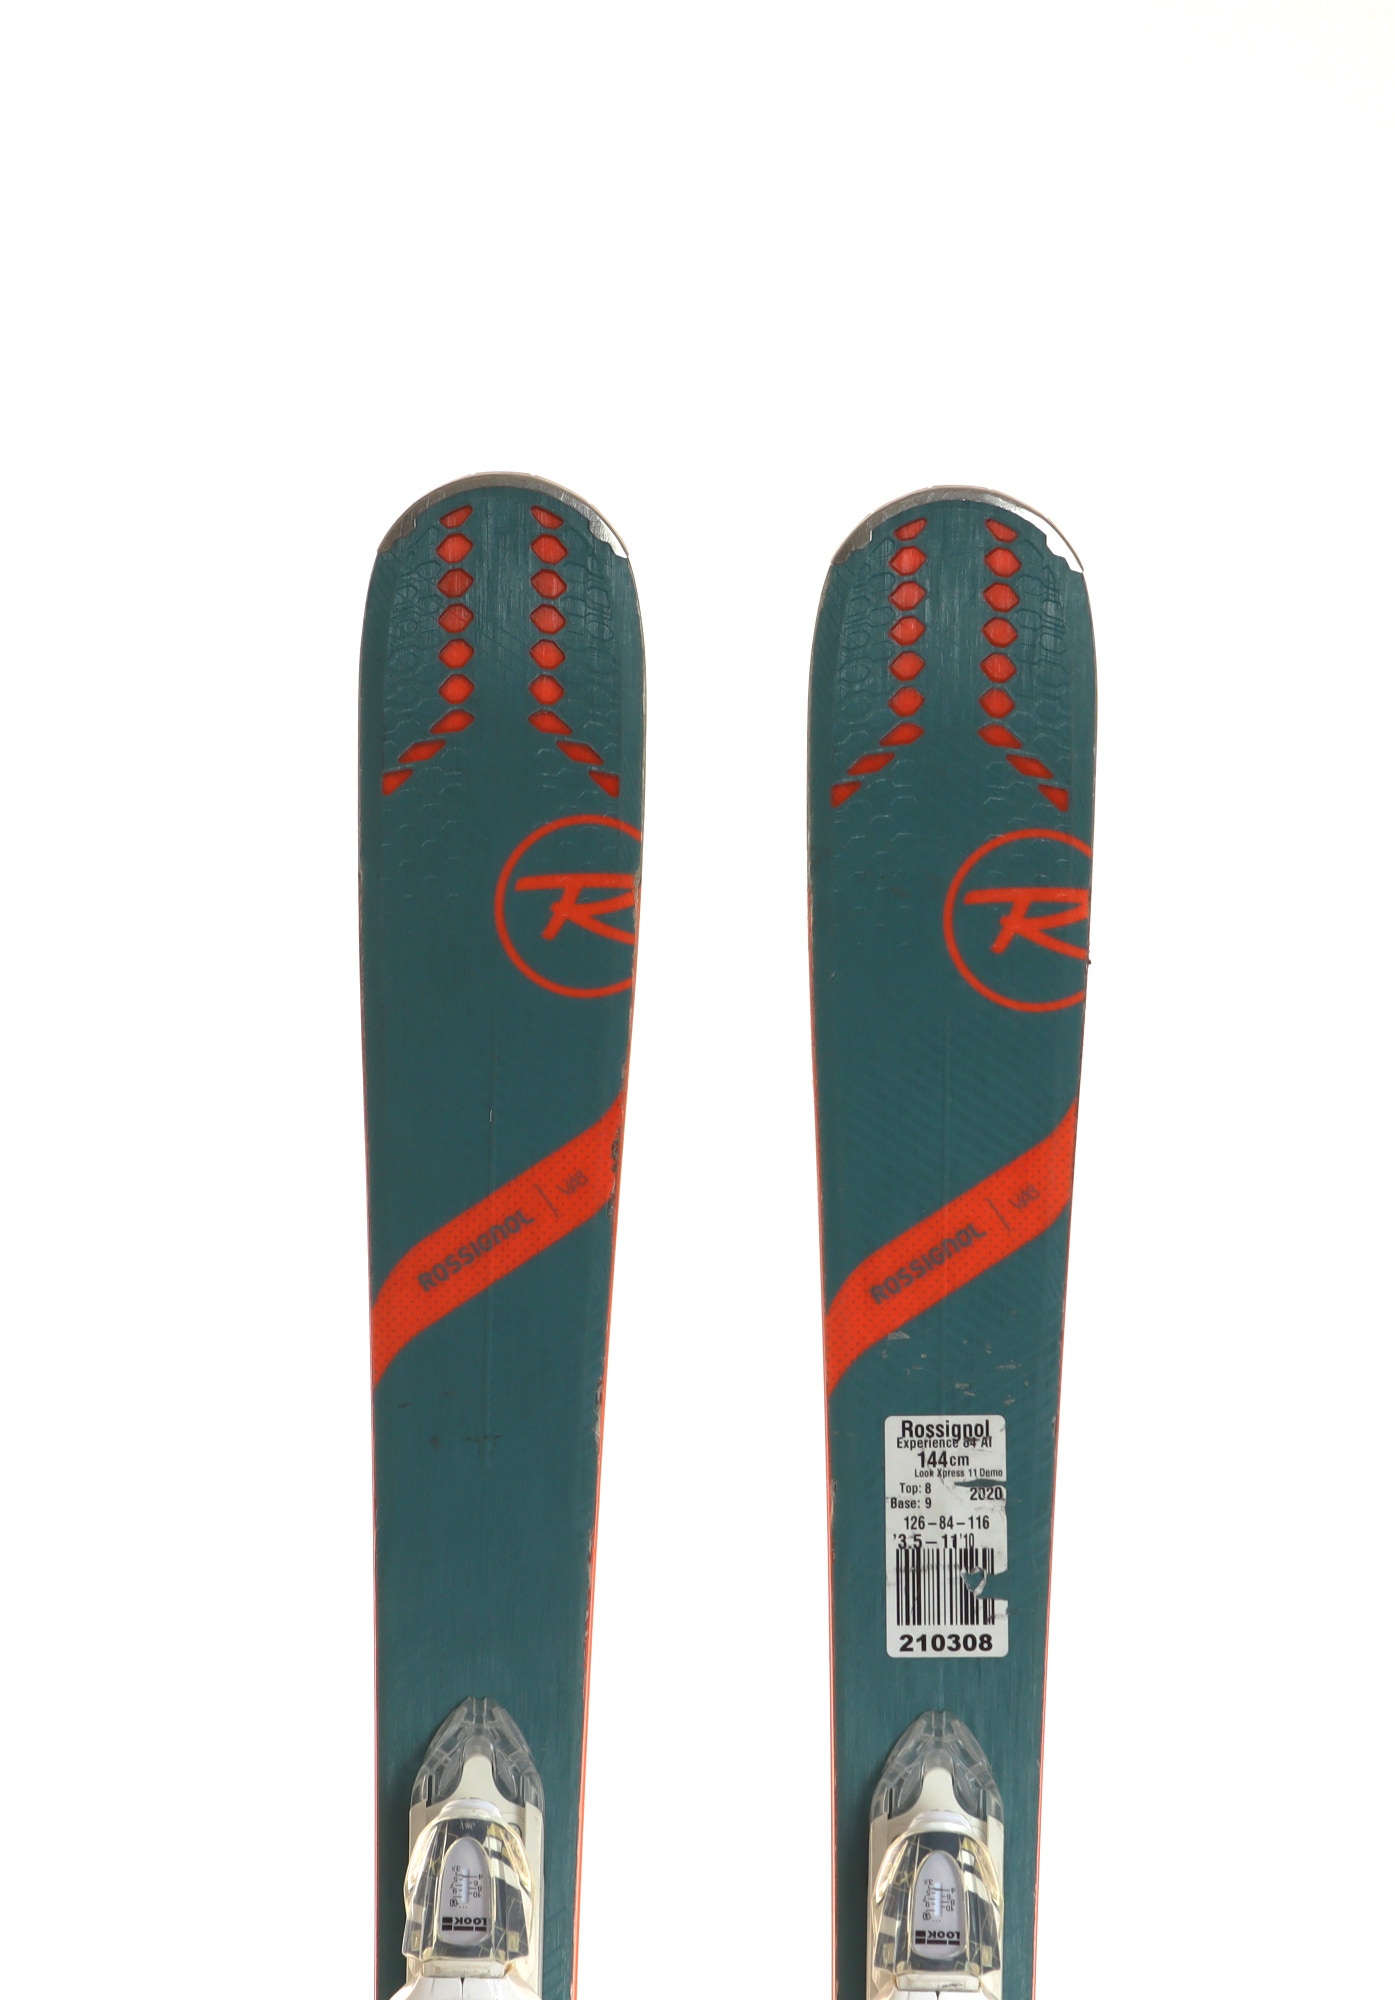 Used 2020 Rossignol Experience 84 AI Demo Ski with Look Xpress 11 Bindings Size 144 (Option 210308)